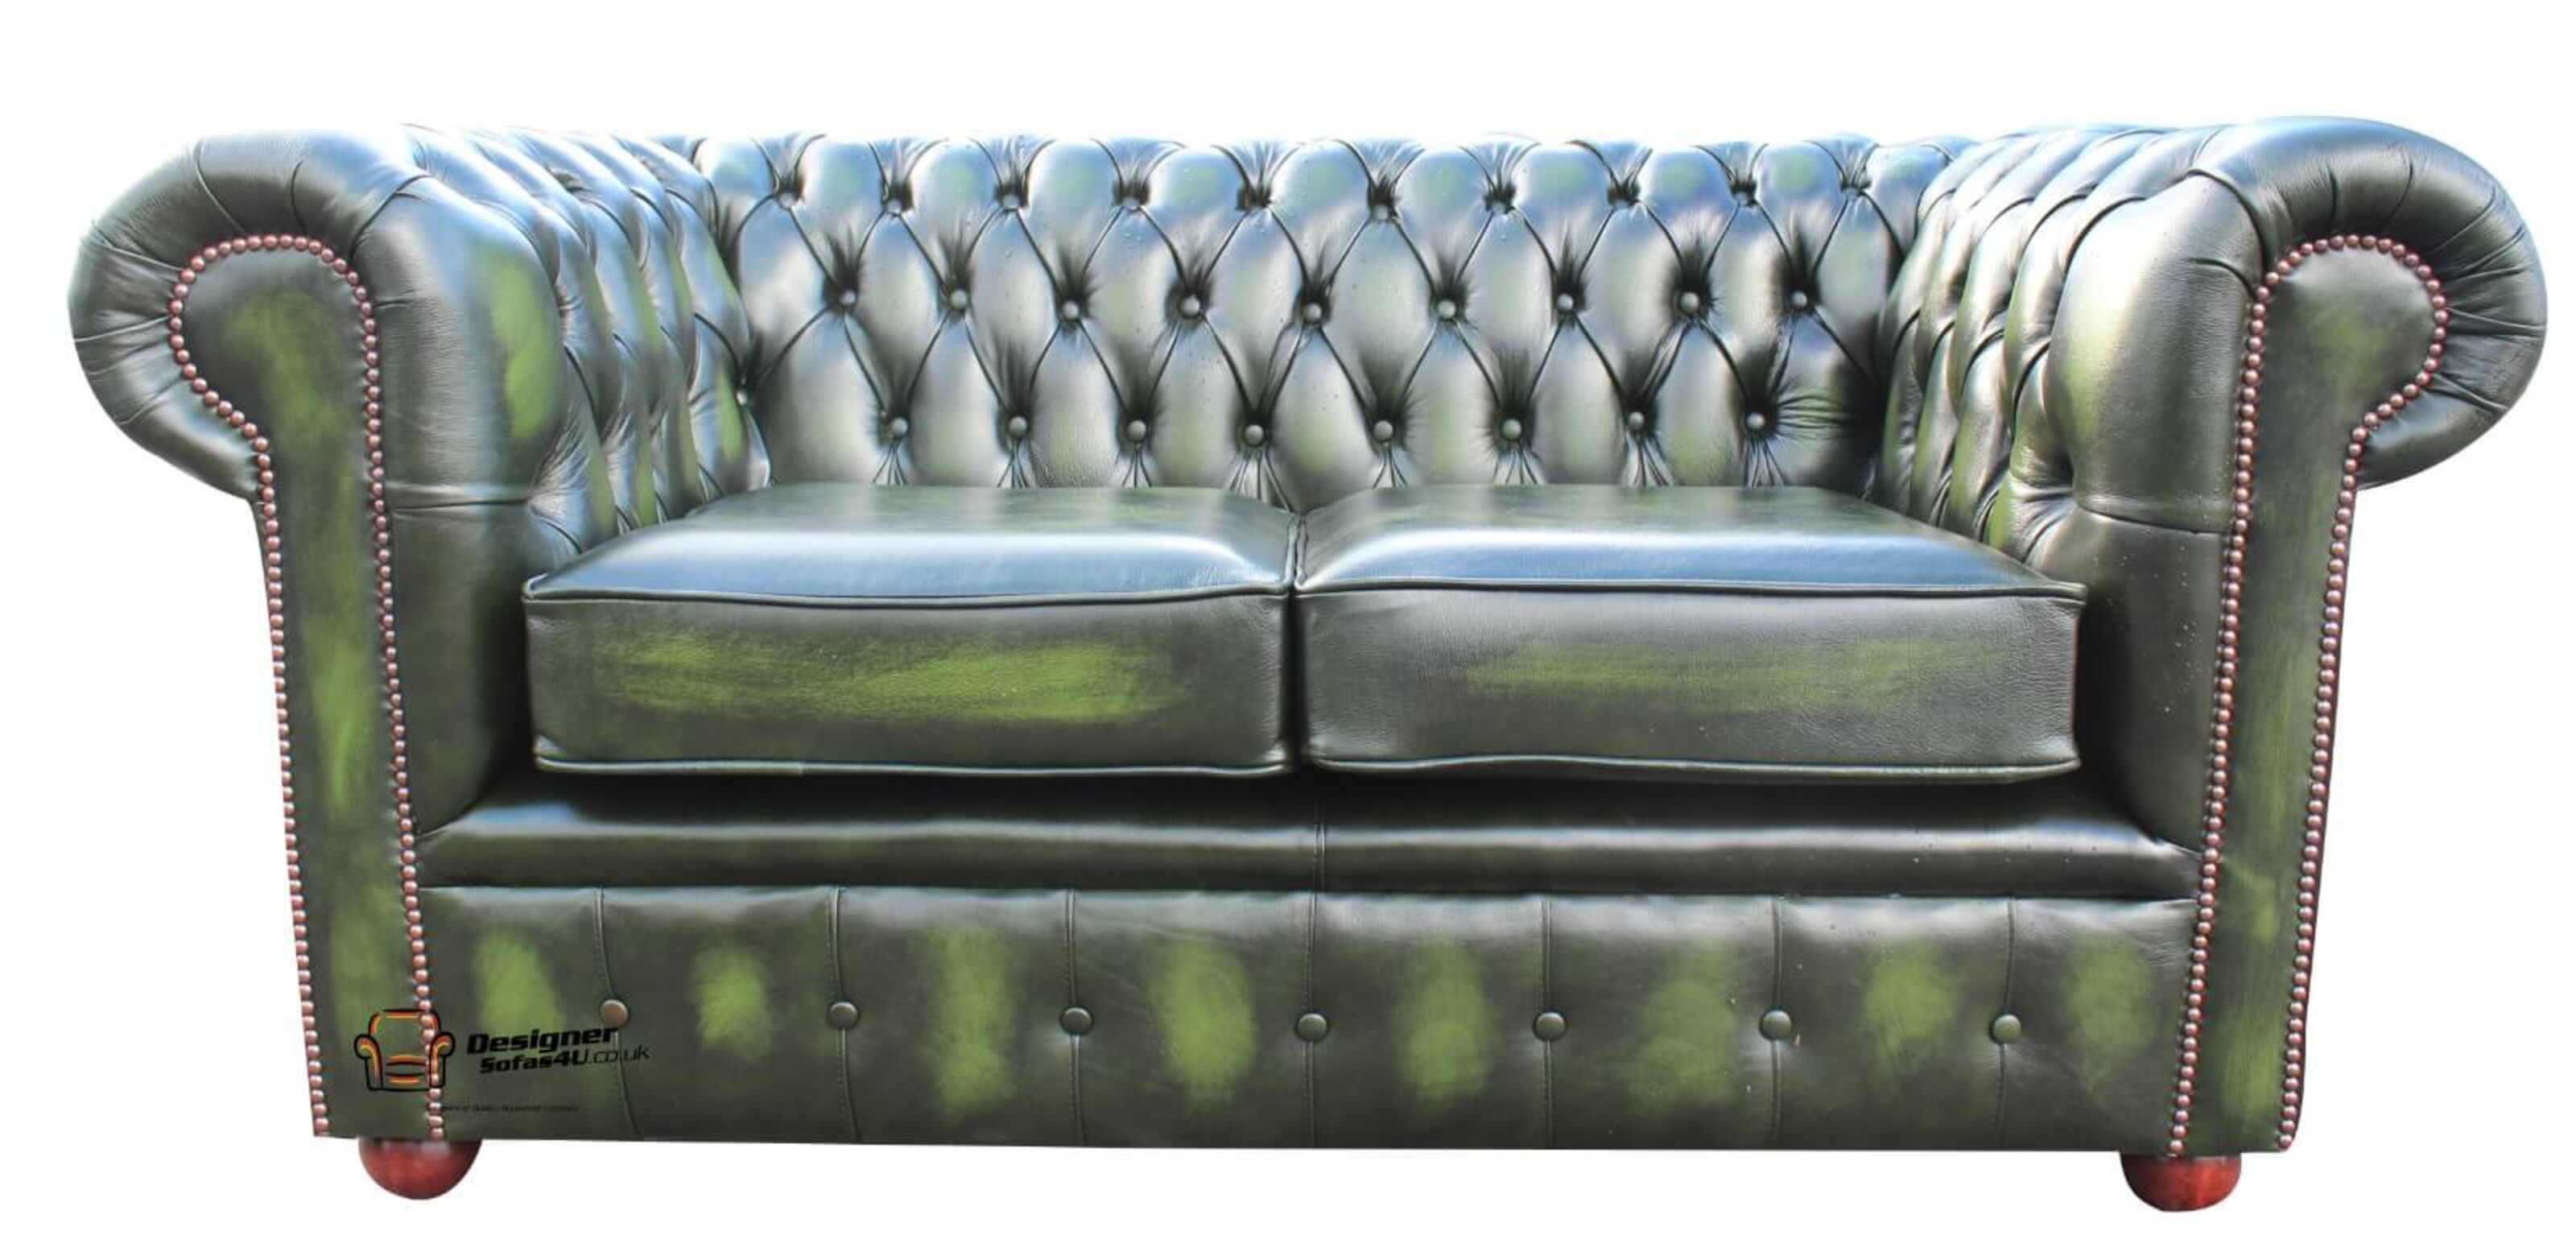 Display to Delight: Exploring Ex-Display Chesterfield Sofas for Your Home  %Post Title